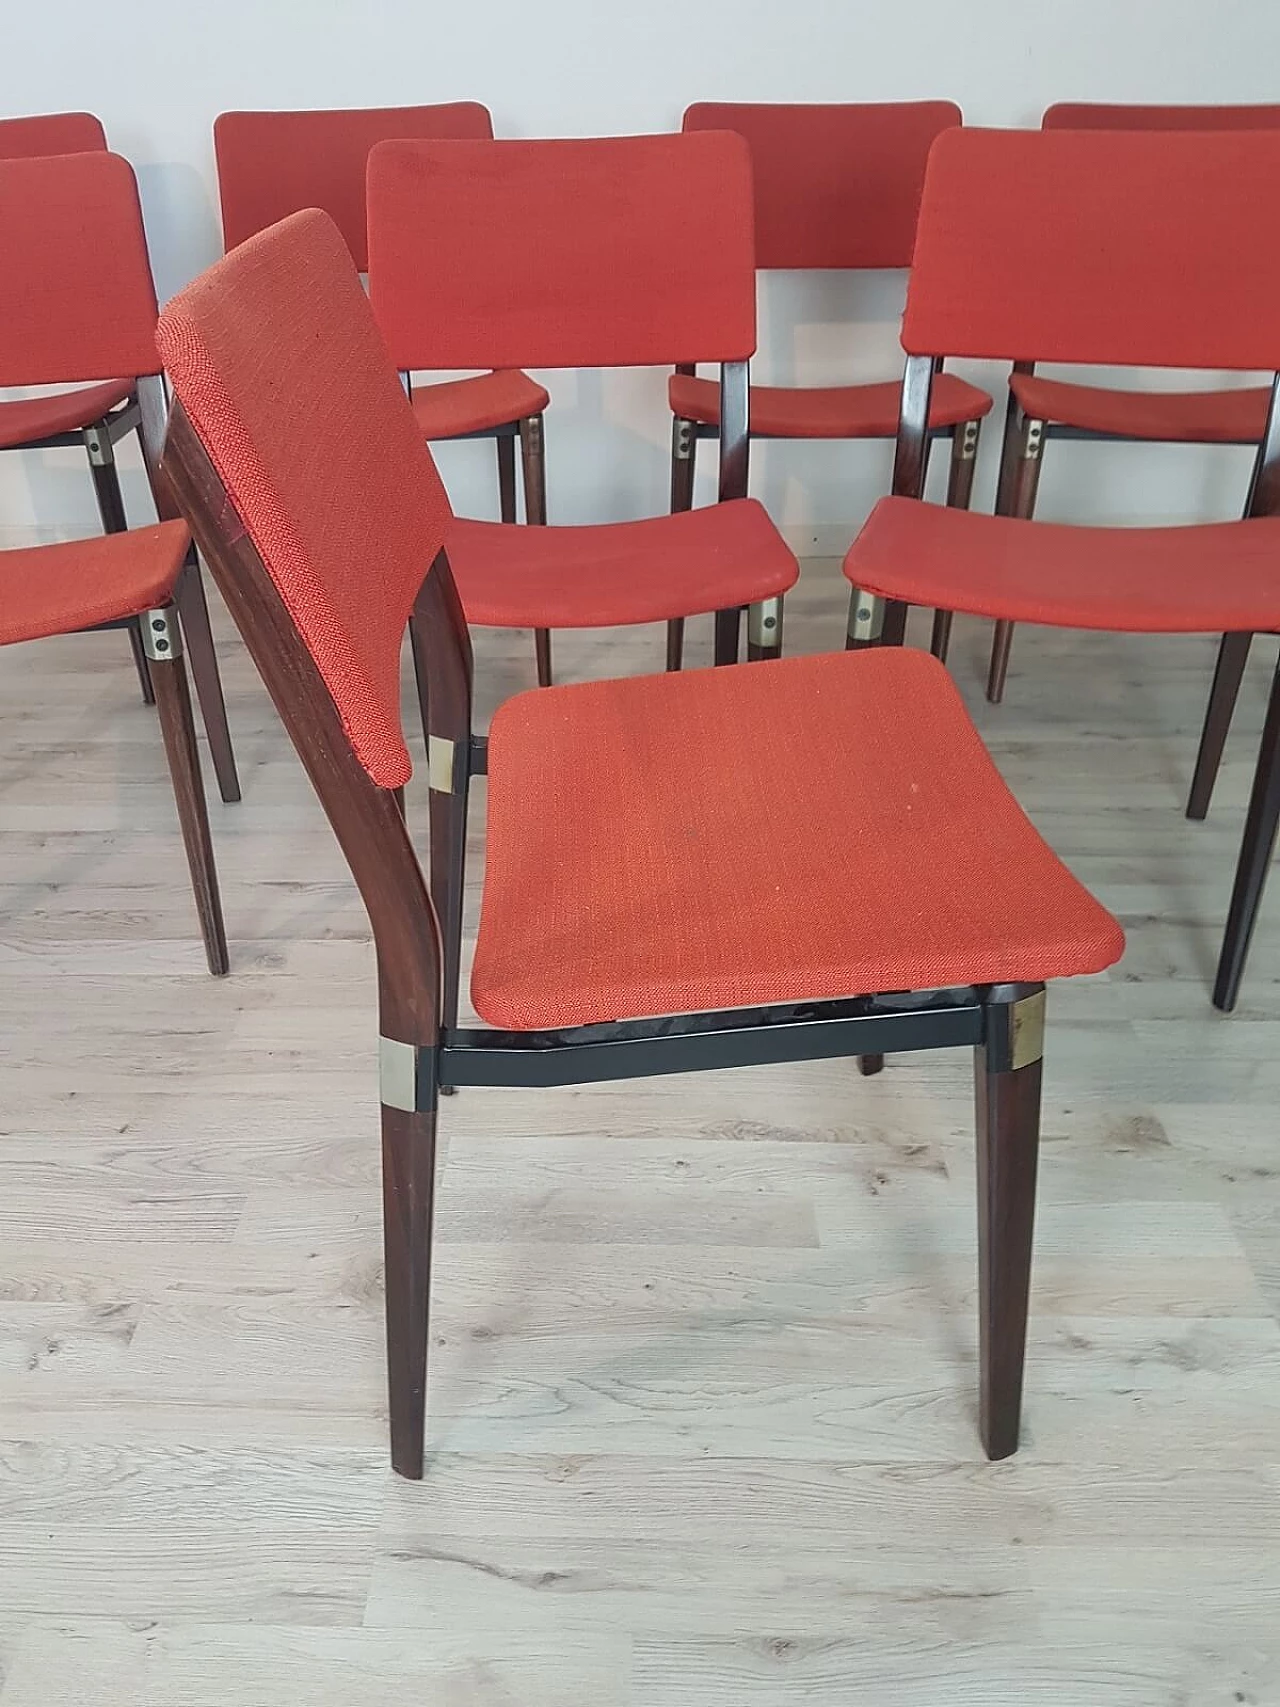 Set of 8 chairs "S82" by Eugenio Gerli for Tecno 10